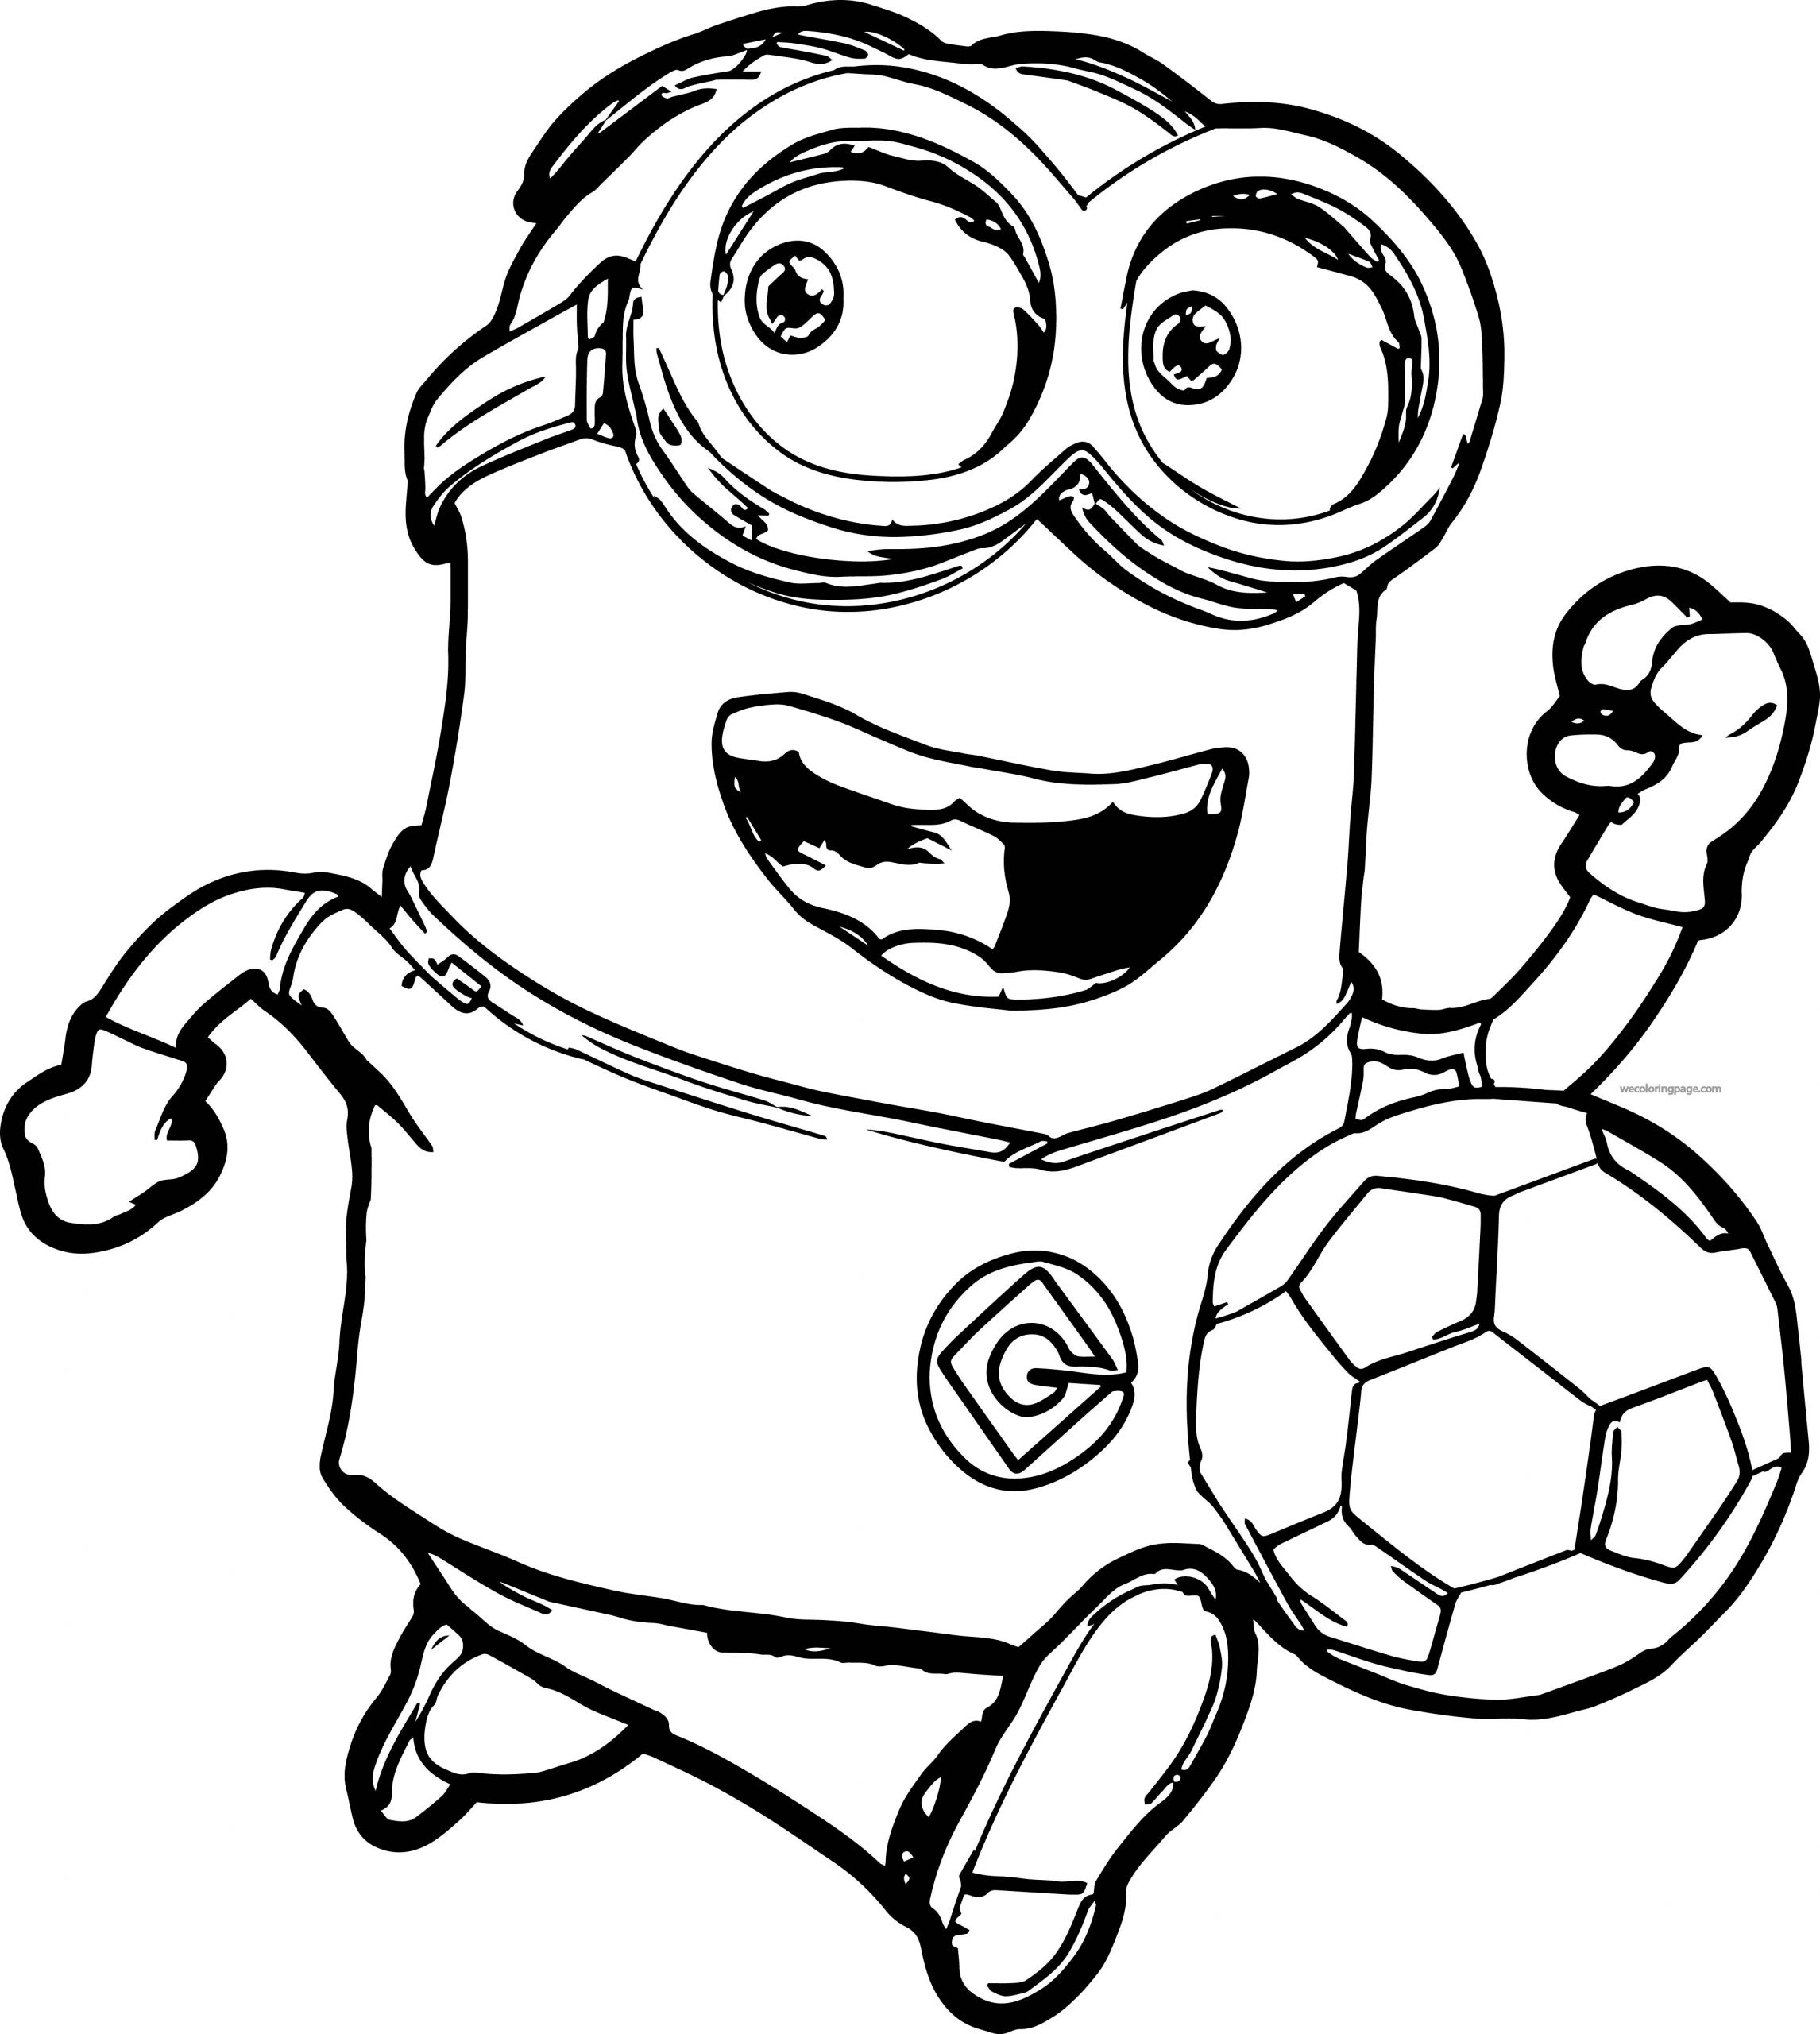 Best Coloring Pages For Kids
 Minion Coloring Pages Best Coloring Pages For Kids